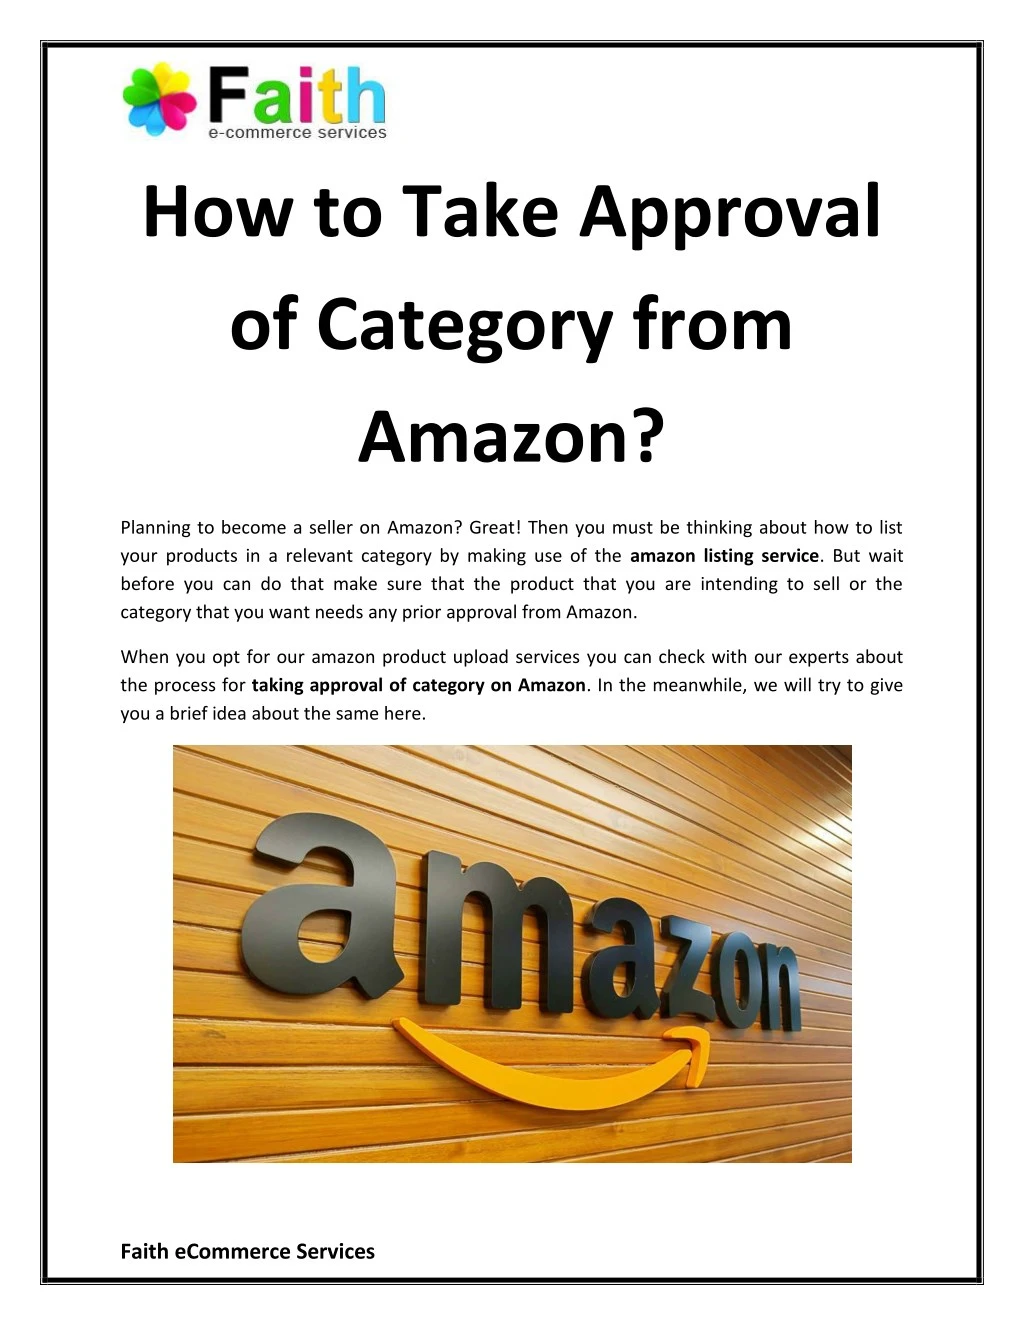 how to take approval of category from amazon